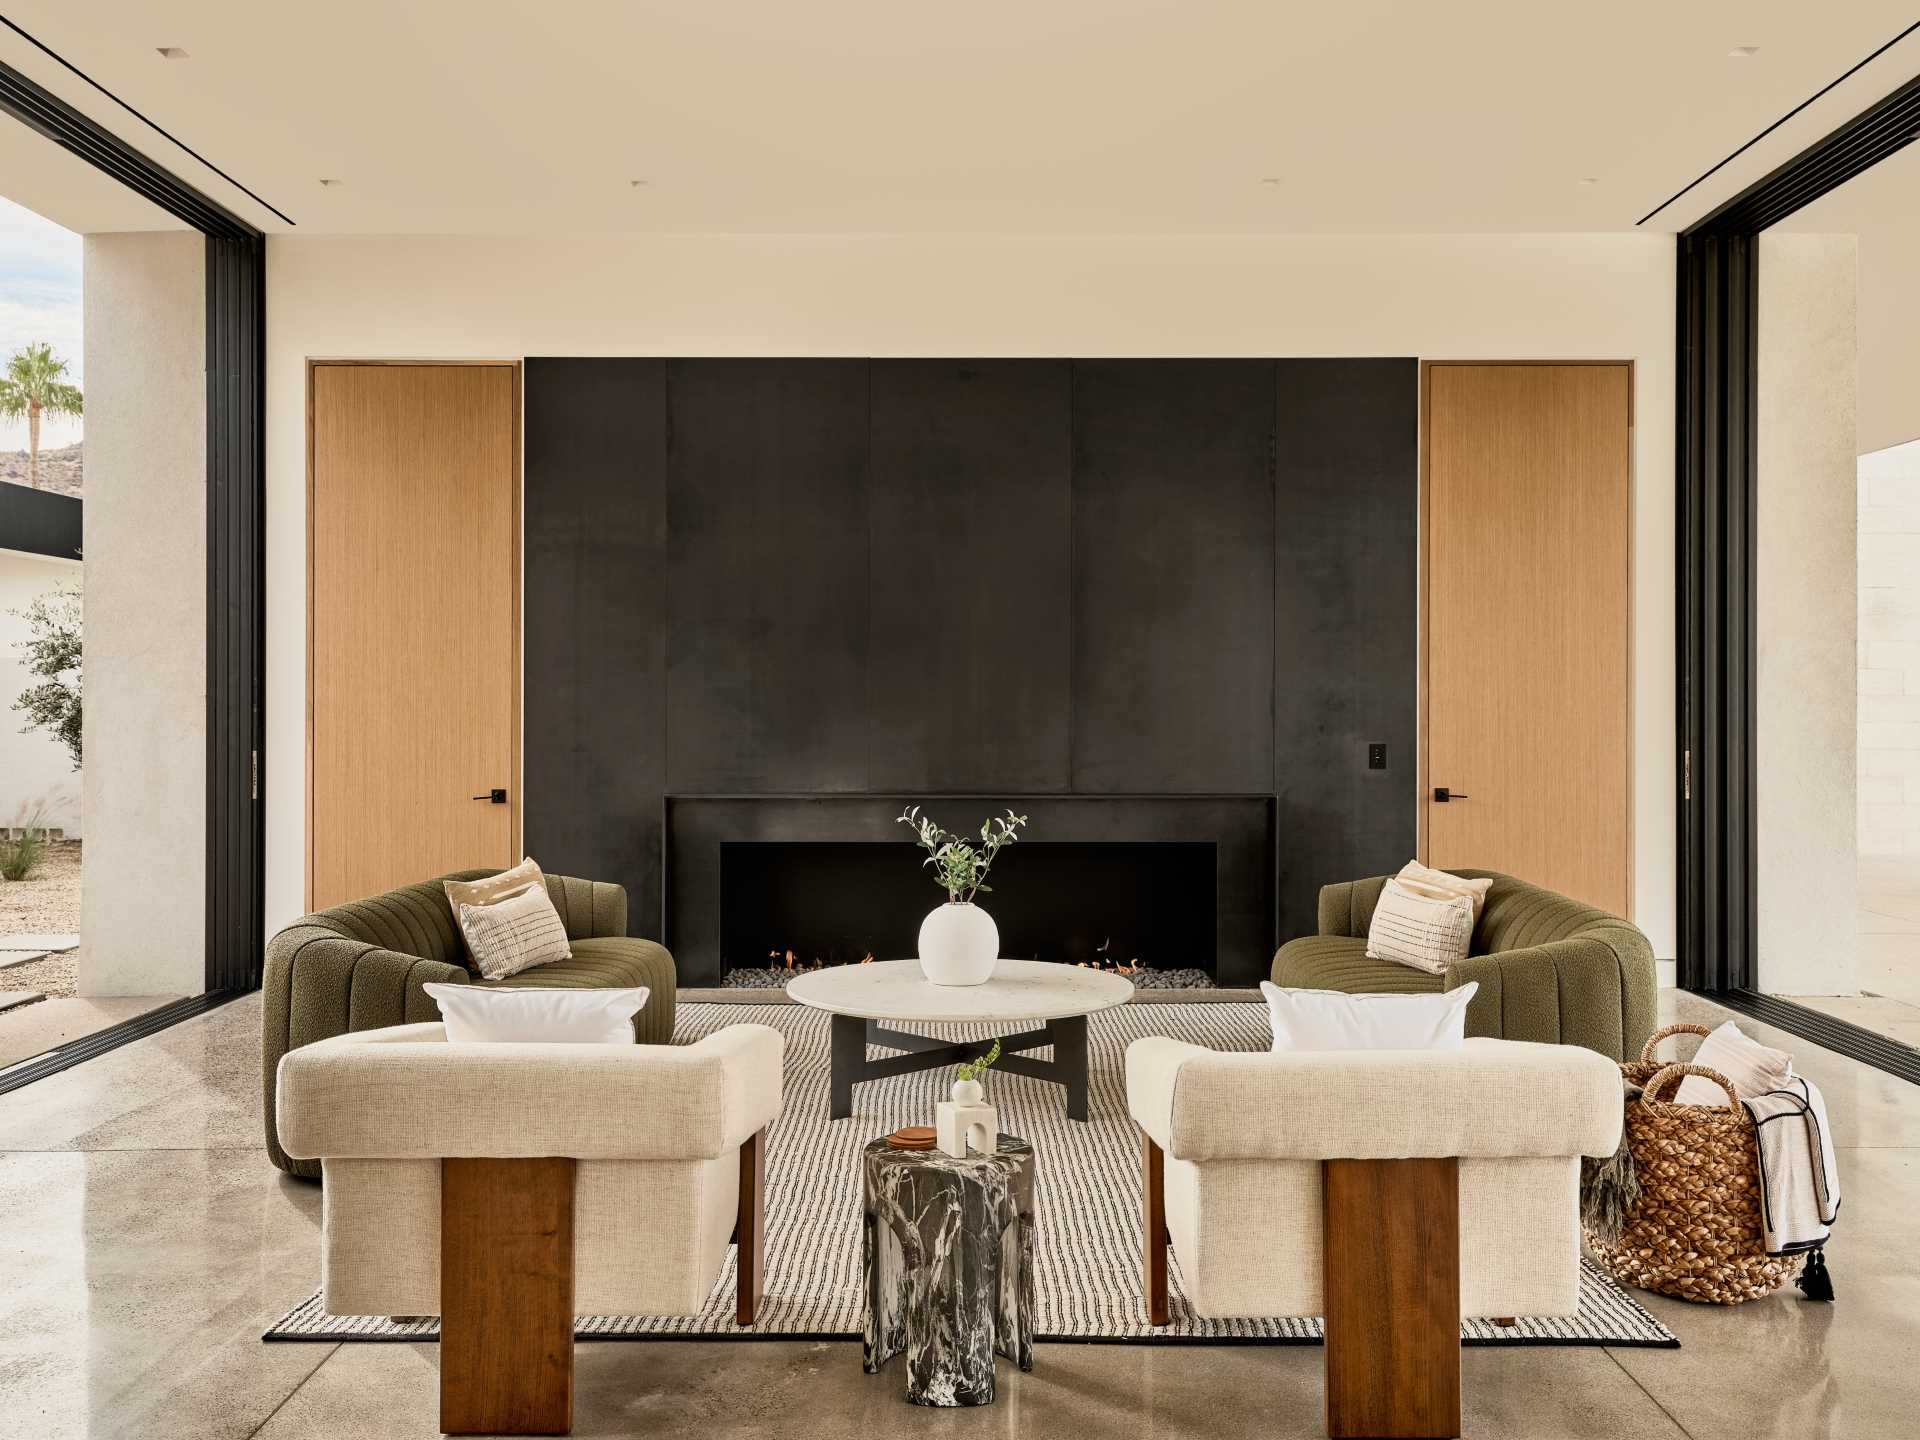 A large, steel-clad fireplace anchors the living room in this great room.